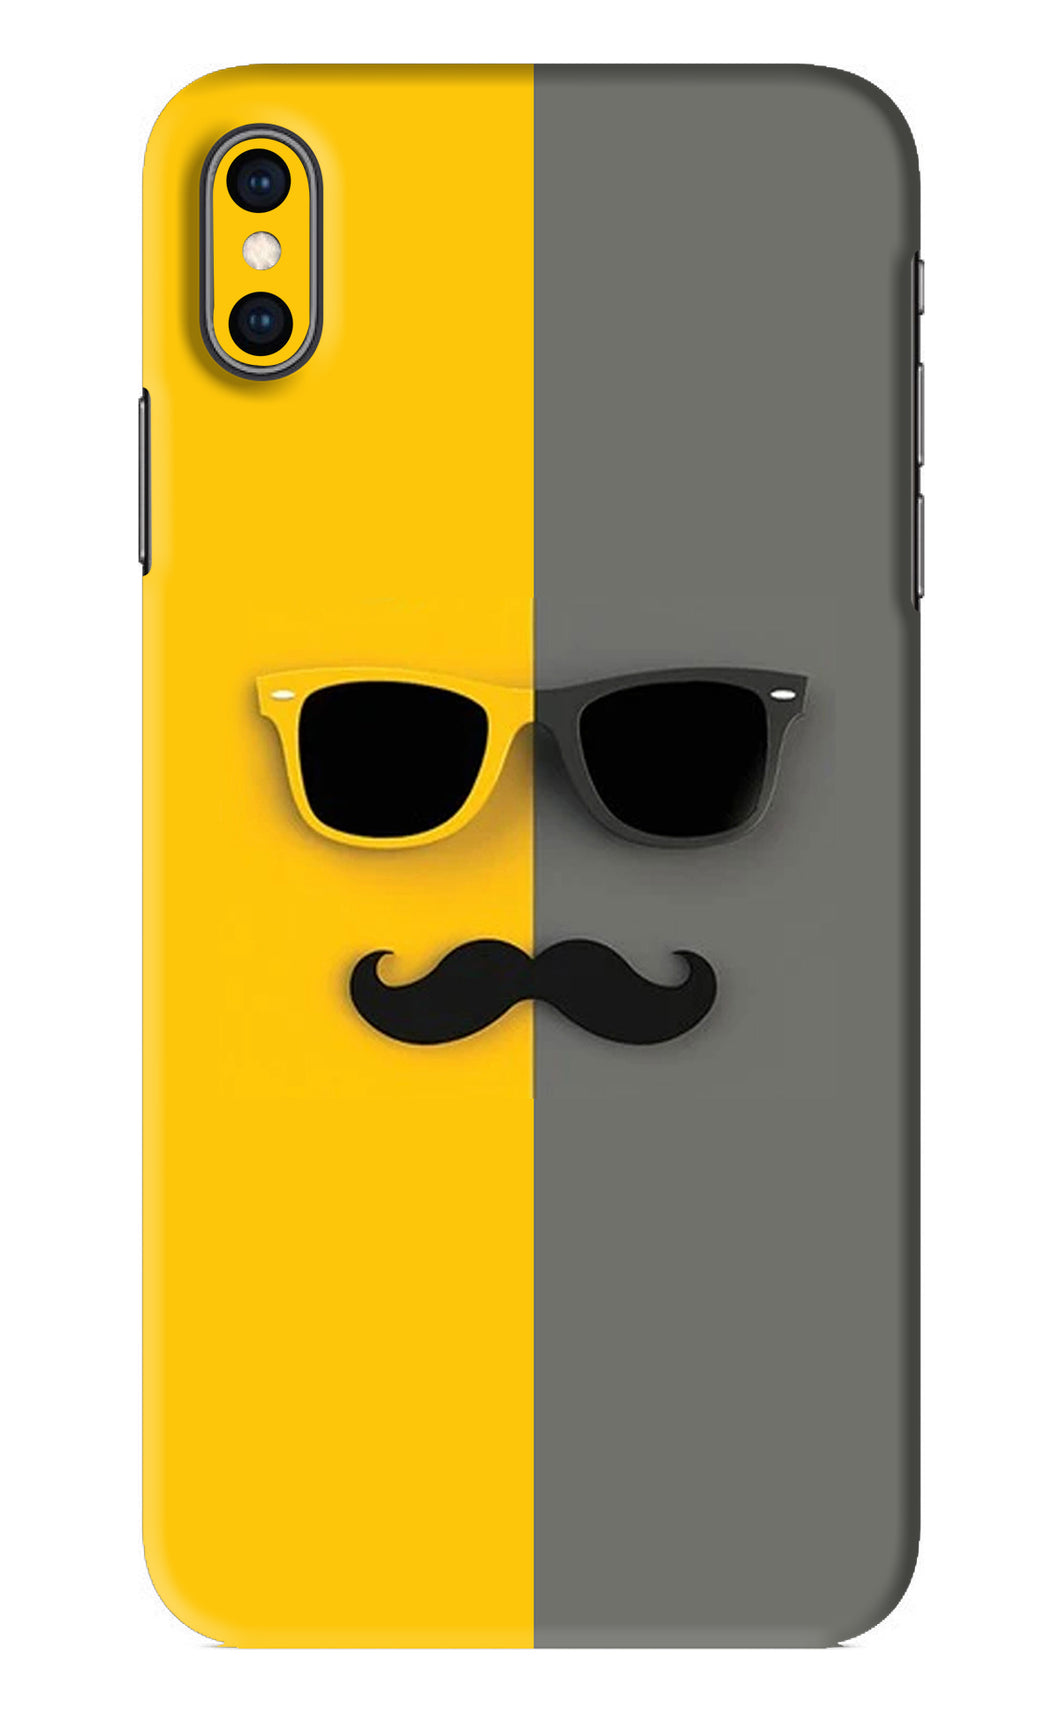 Sunglasses with Mustache iPhone XS Max Back Skin Wrap